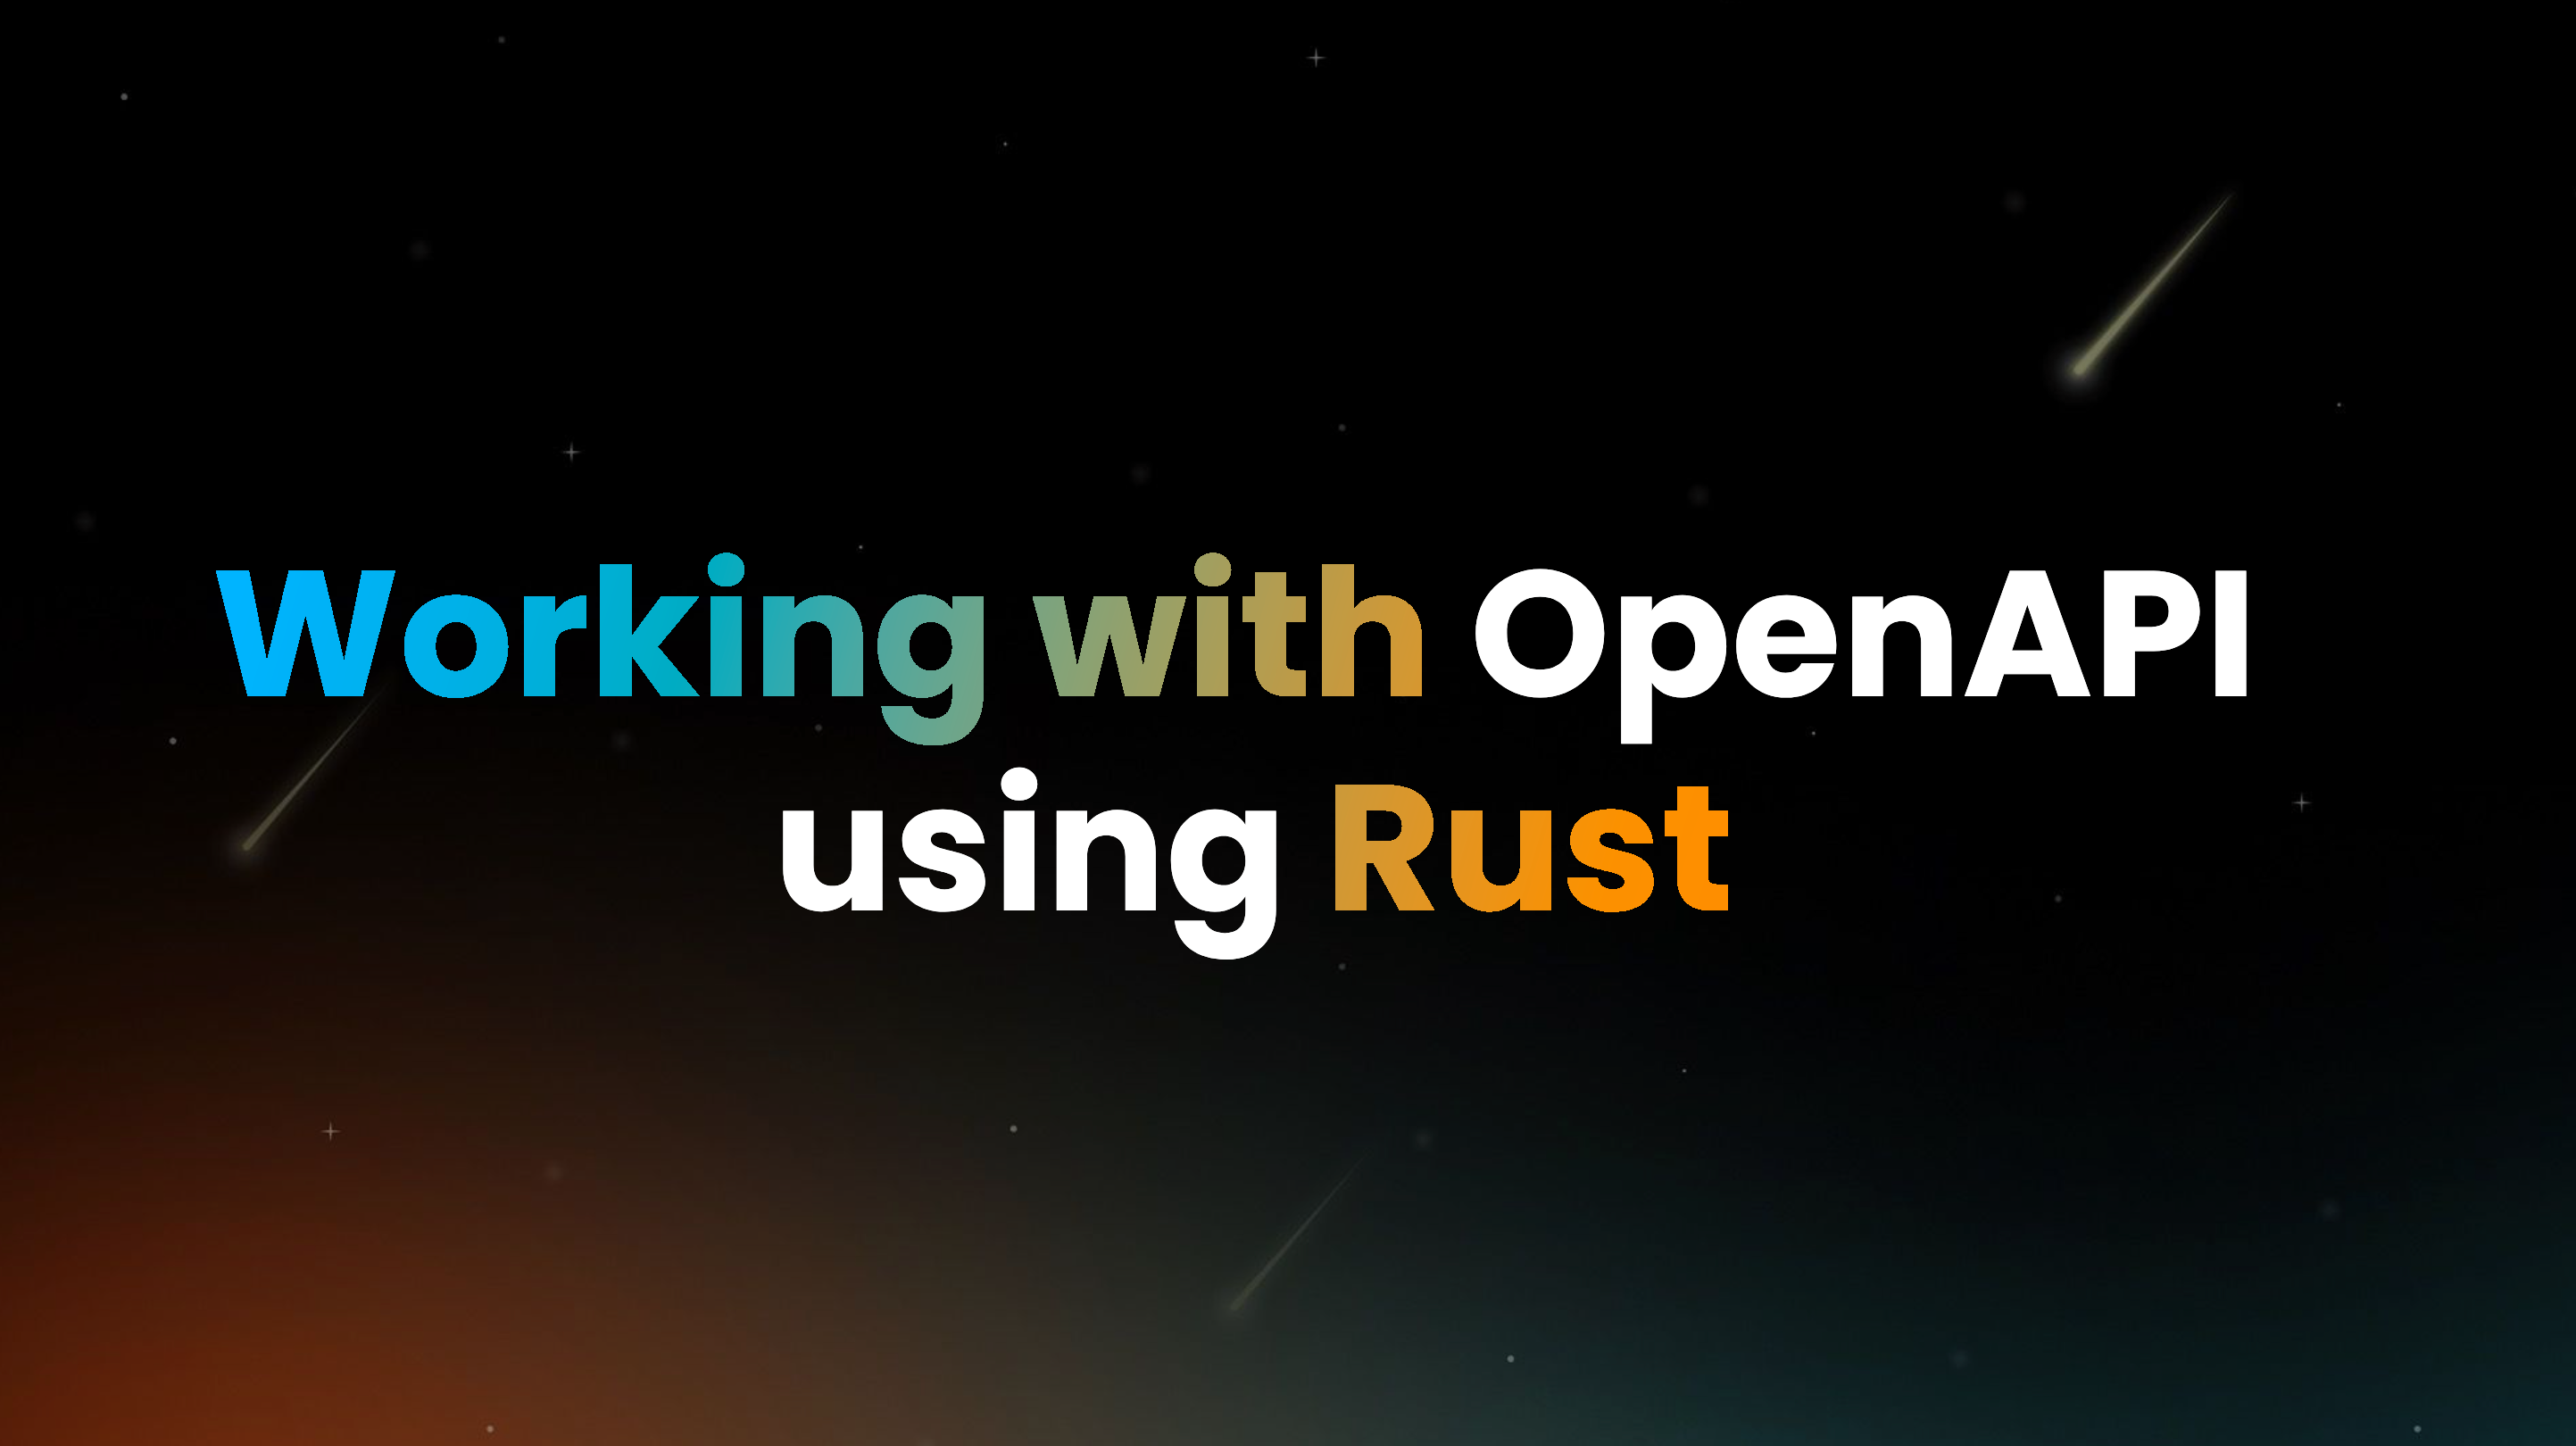 Working with OpenAPI using Rust